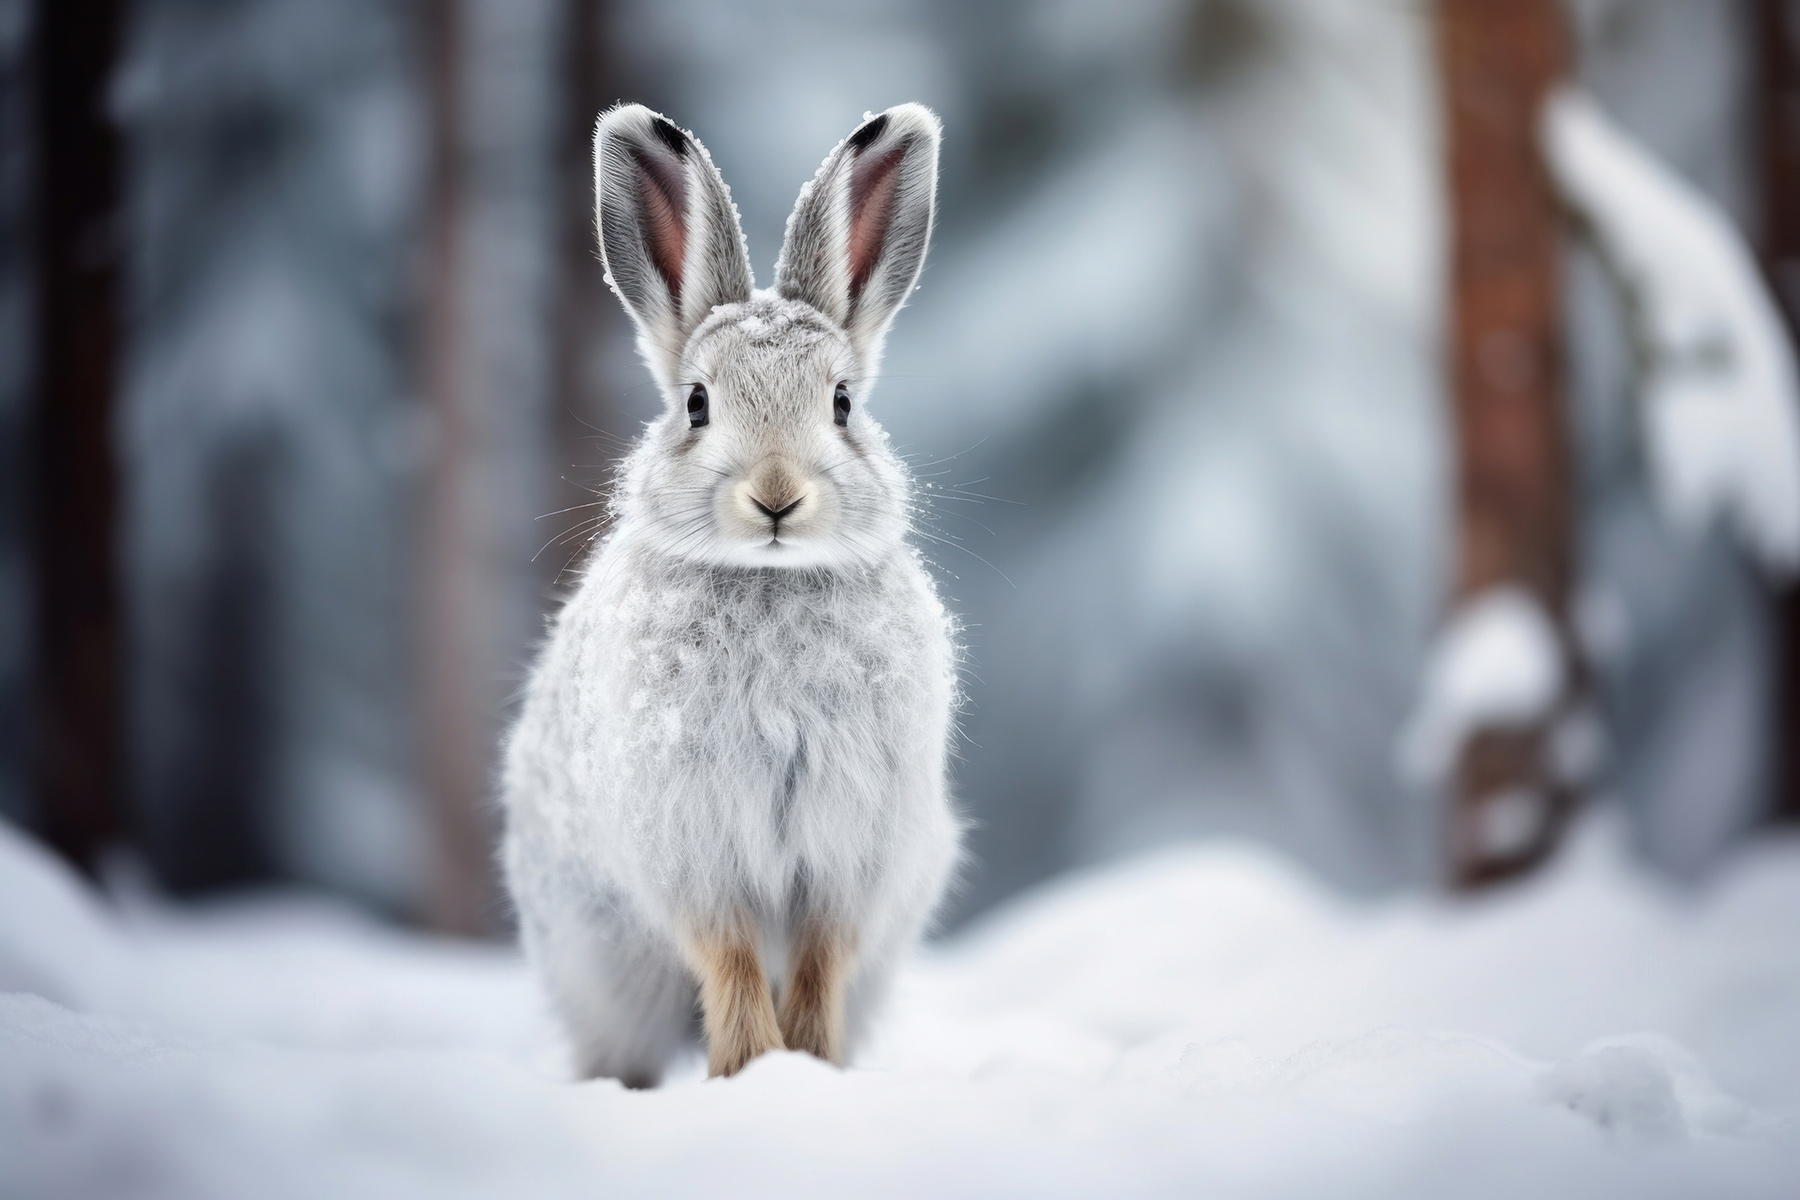 Stock photo of a bunny / rabbit outdoors in the snow (Image courtesy of RawPixel.com)